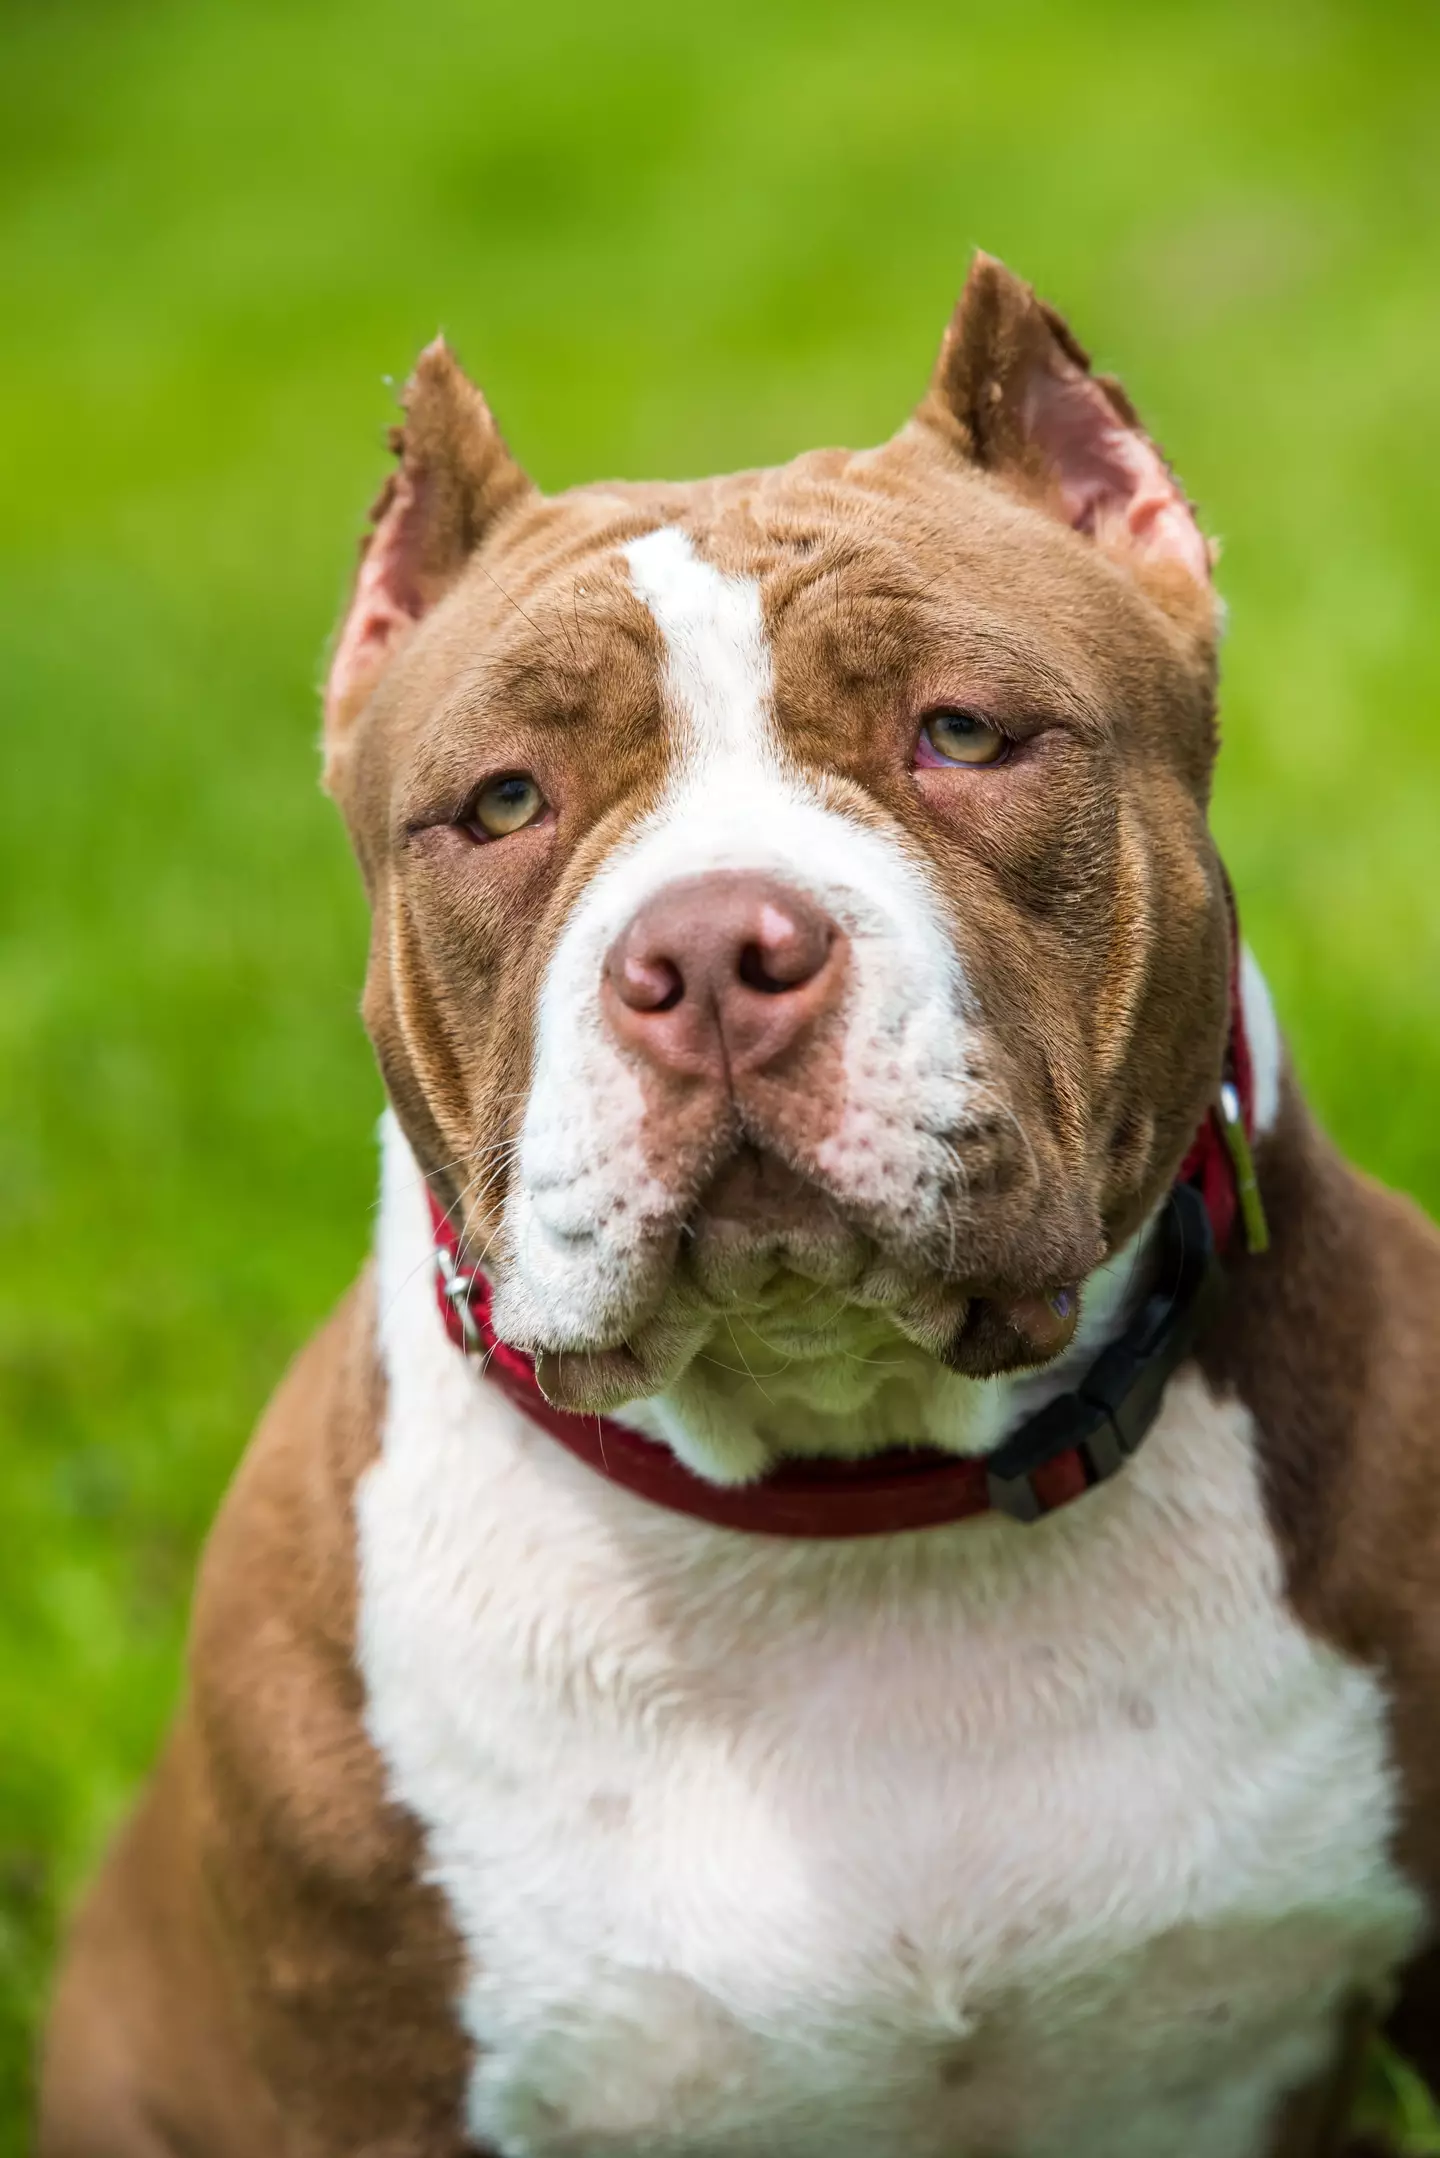 XL bullys have become a popular breed in the UK in recent years.